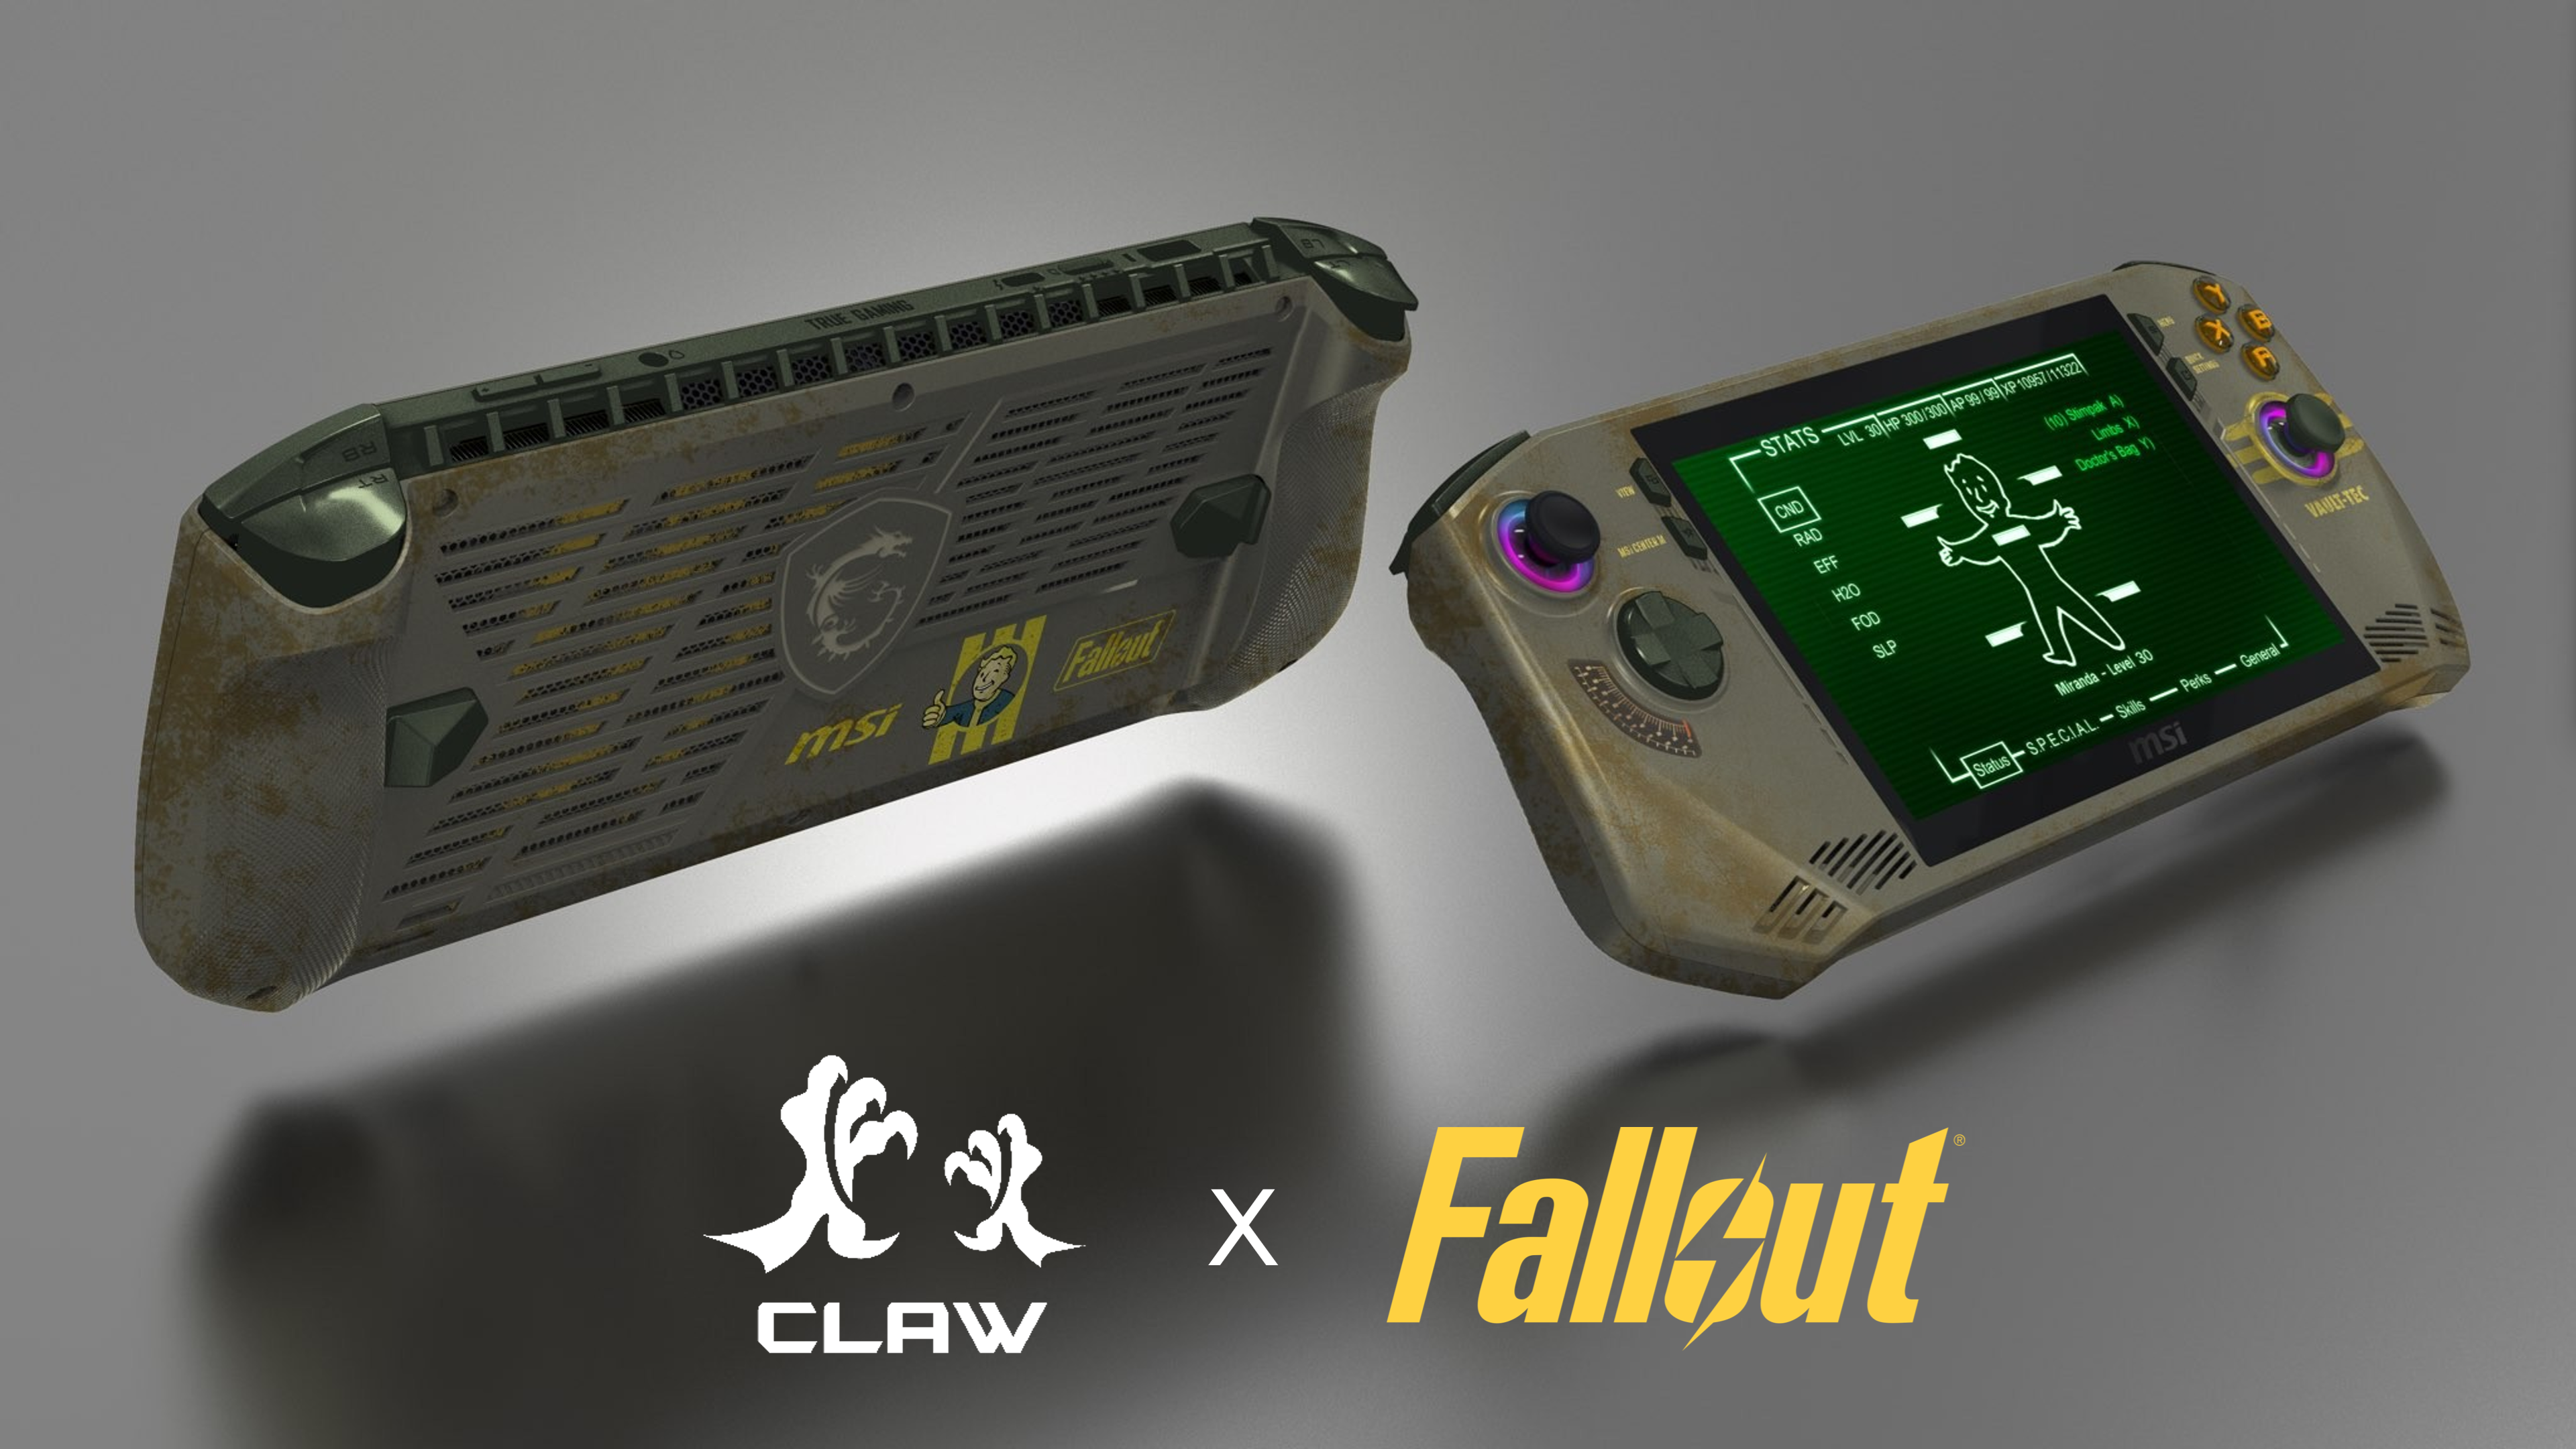 04 Claw x Fallout